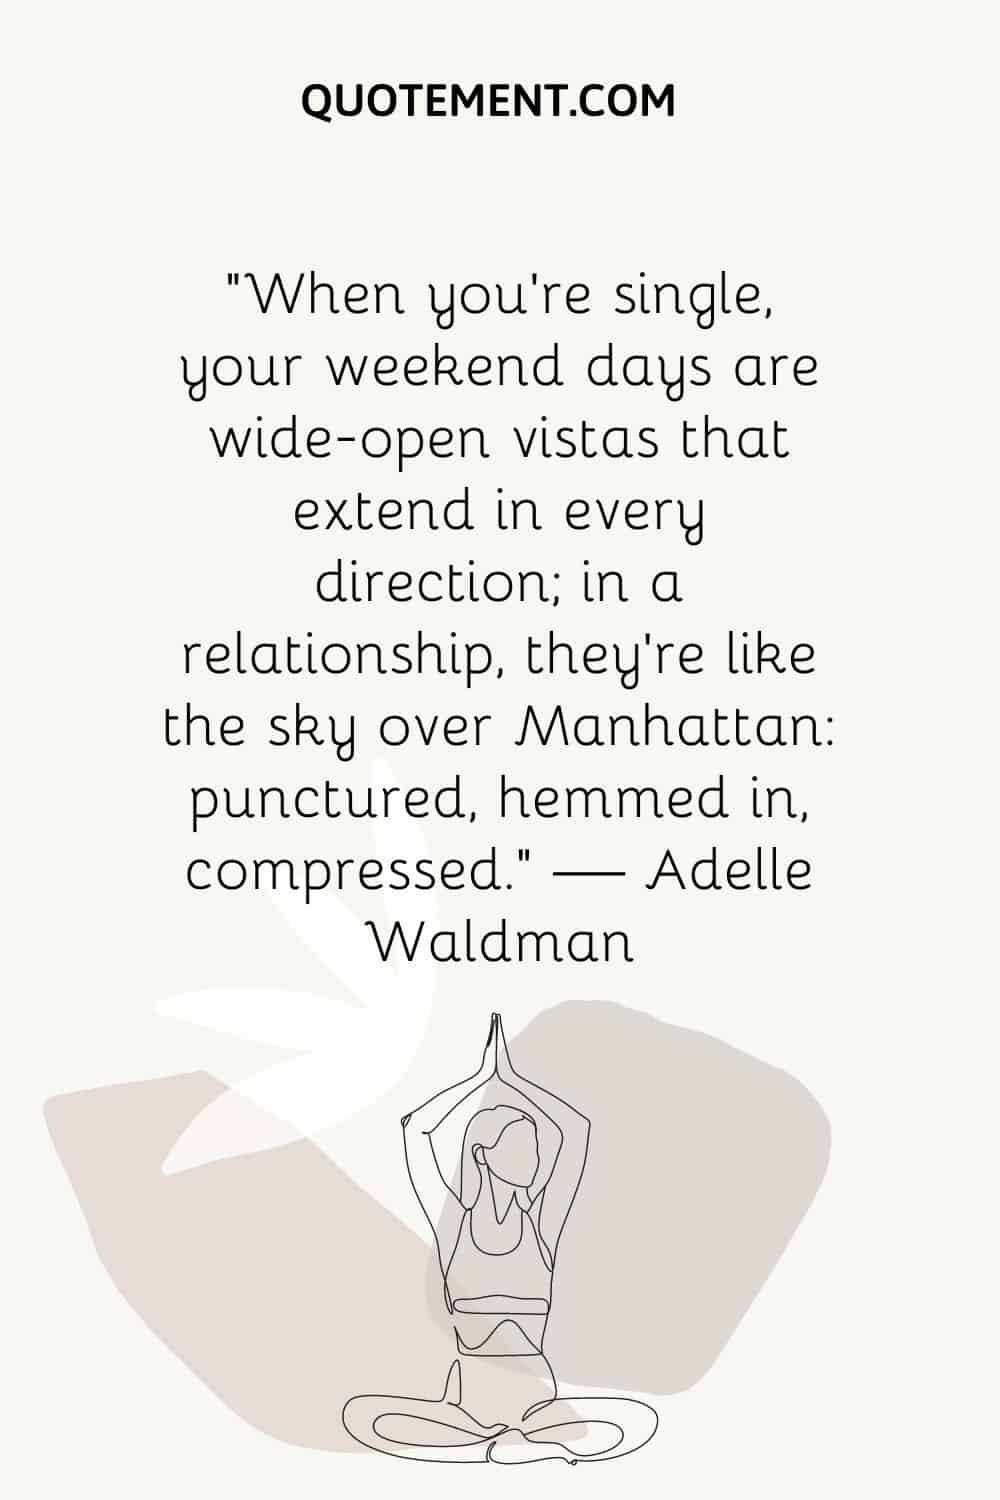 “When you’re single, your weekend days are wide-open vistas that extend in every direction; in a relationship, they’re like the sky over Manhattan punctured, hemmed in, compressed.”
